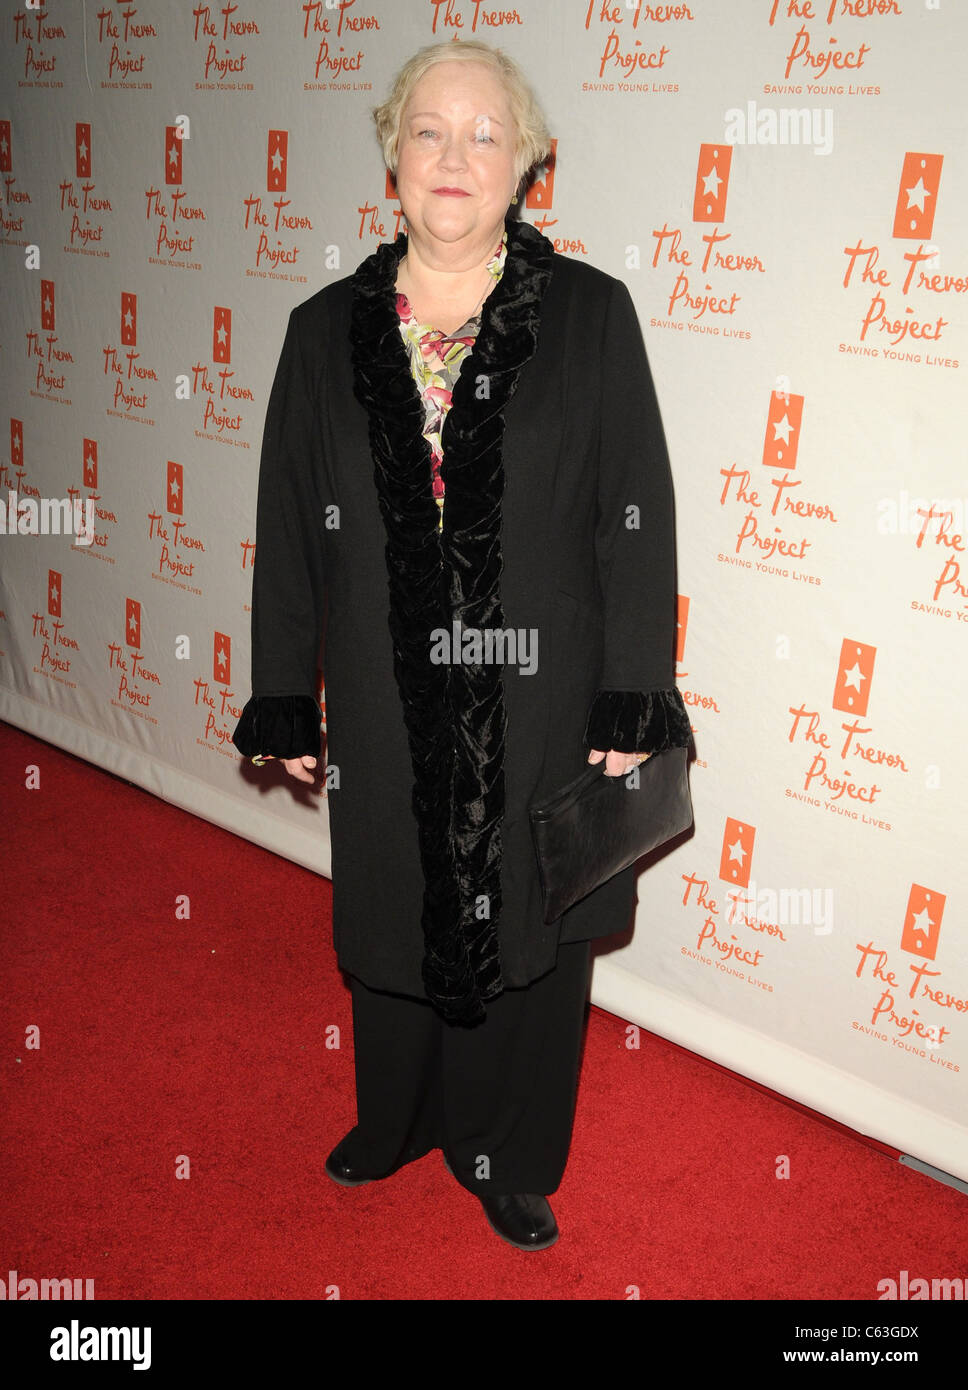 Kathy Kinney at arrivals for Trevor LIVE Annual Benefiting for The Trevor Project, The Hollywood Palladium, Los Angeles, CA December 5, 2010. Photo By: Dee Cercone/Everett Collection Stock Photo